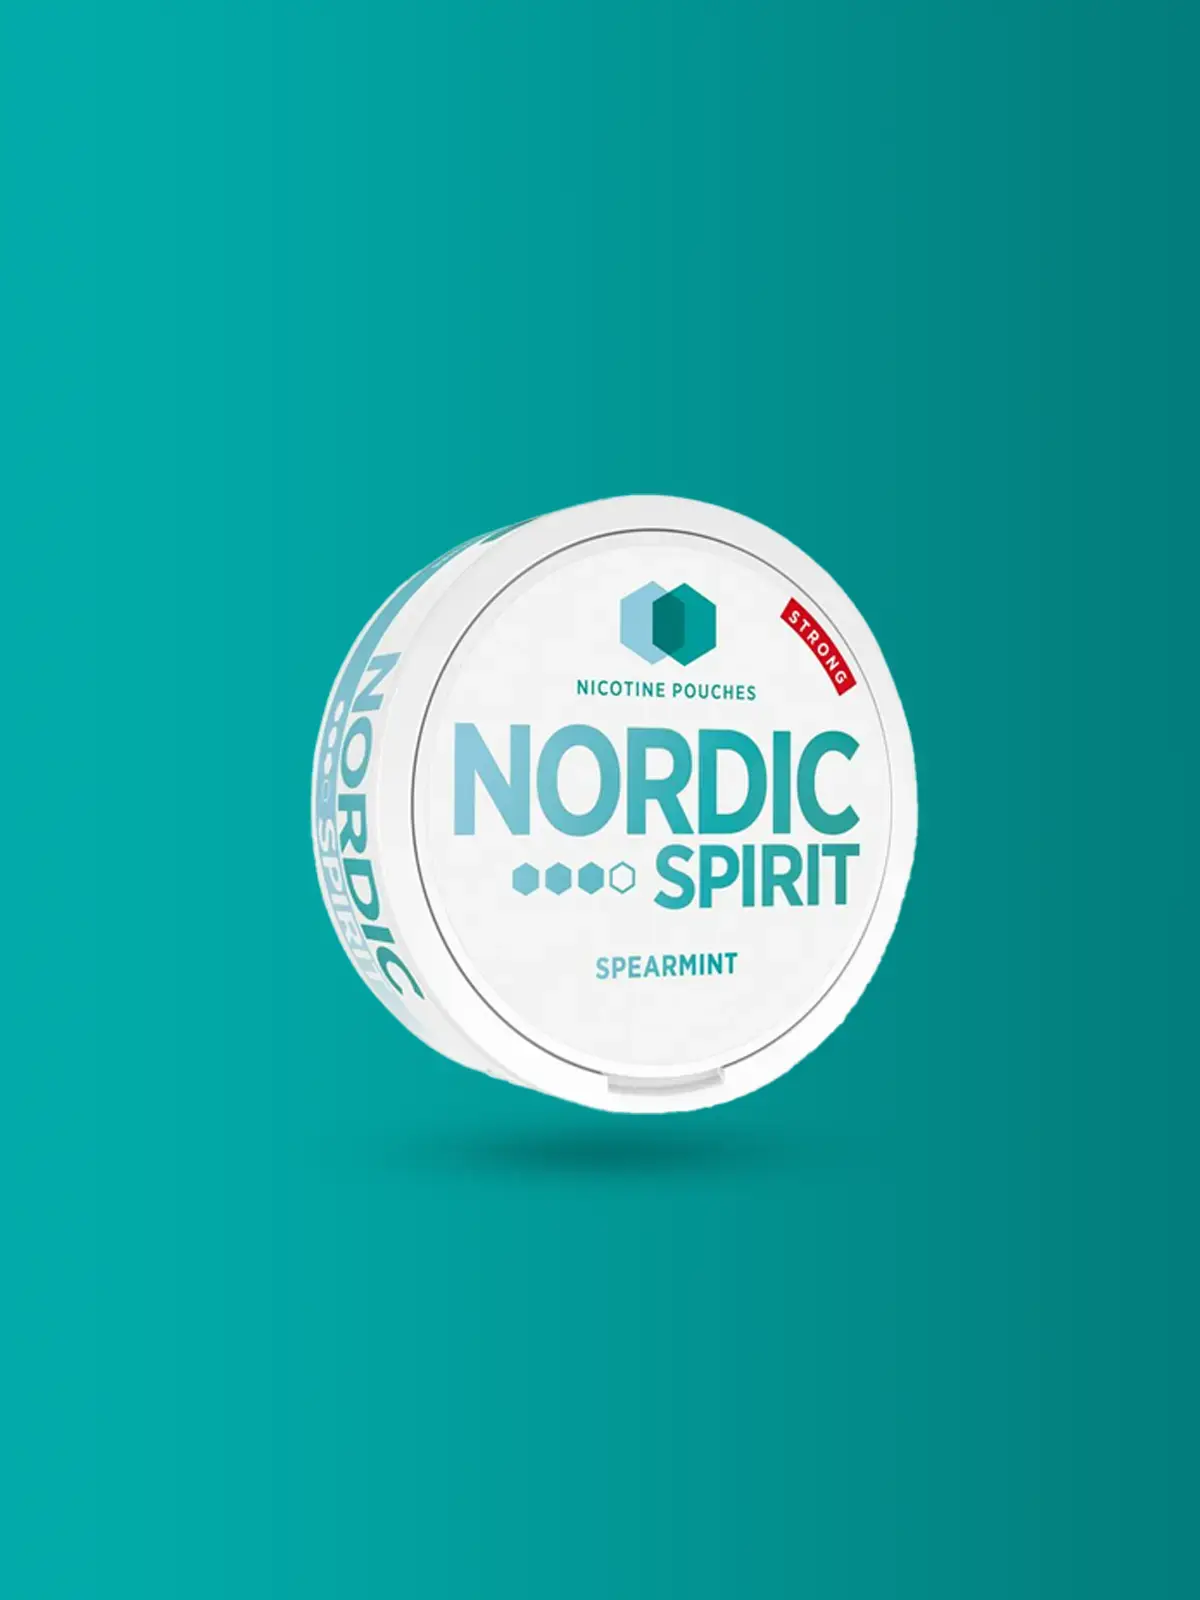 A pack of Nordic Spirit Spearmint in front of a teal coloured background